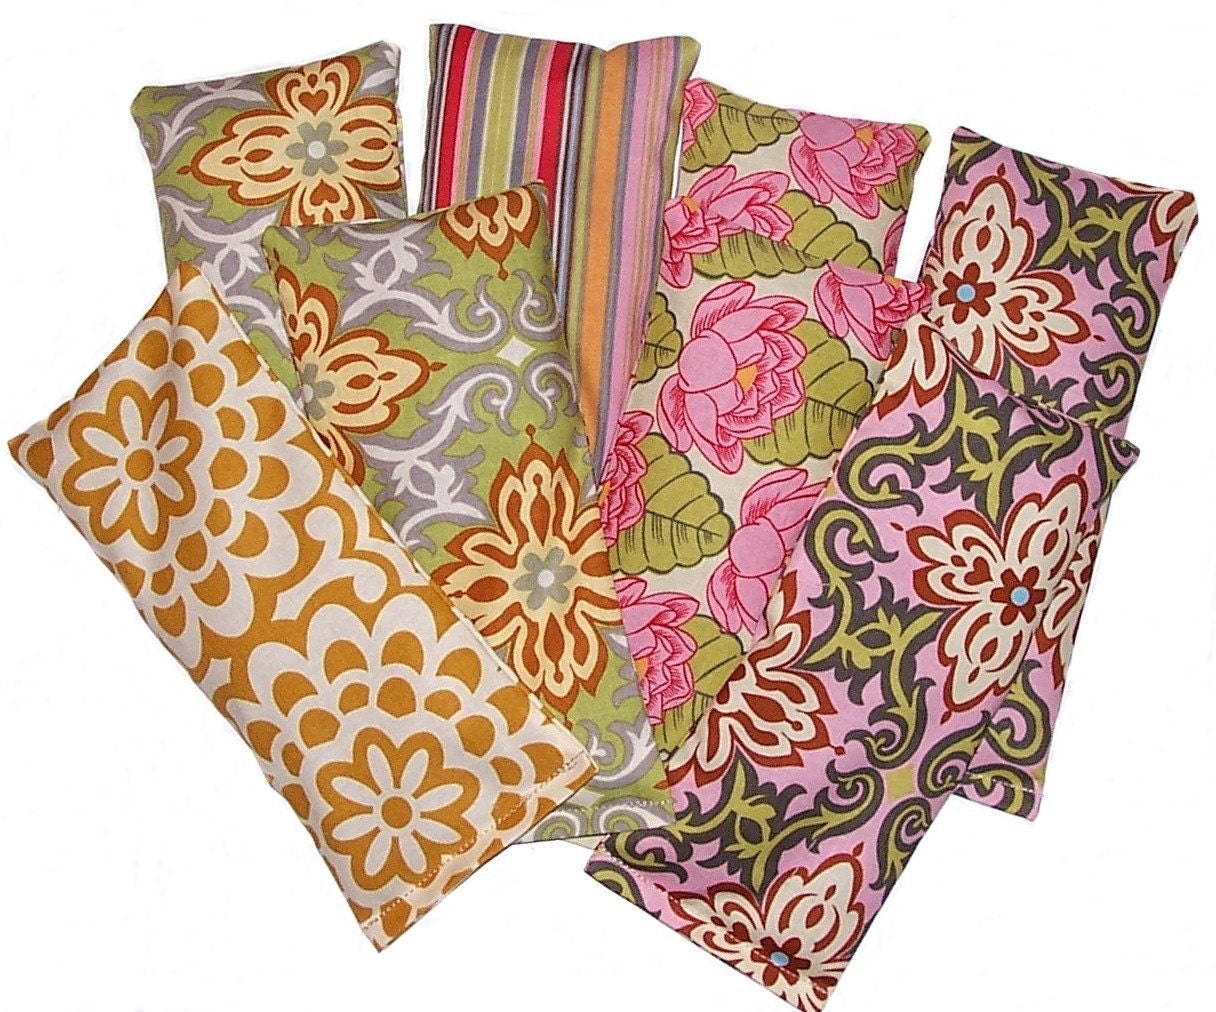 8 Eye Pillows Wholesale with Amy Butler Fabric